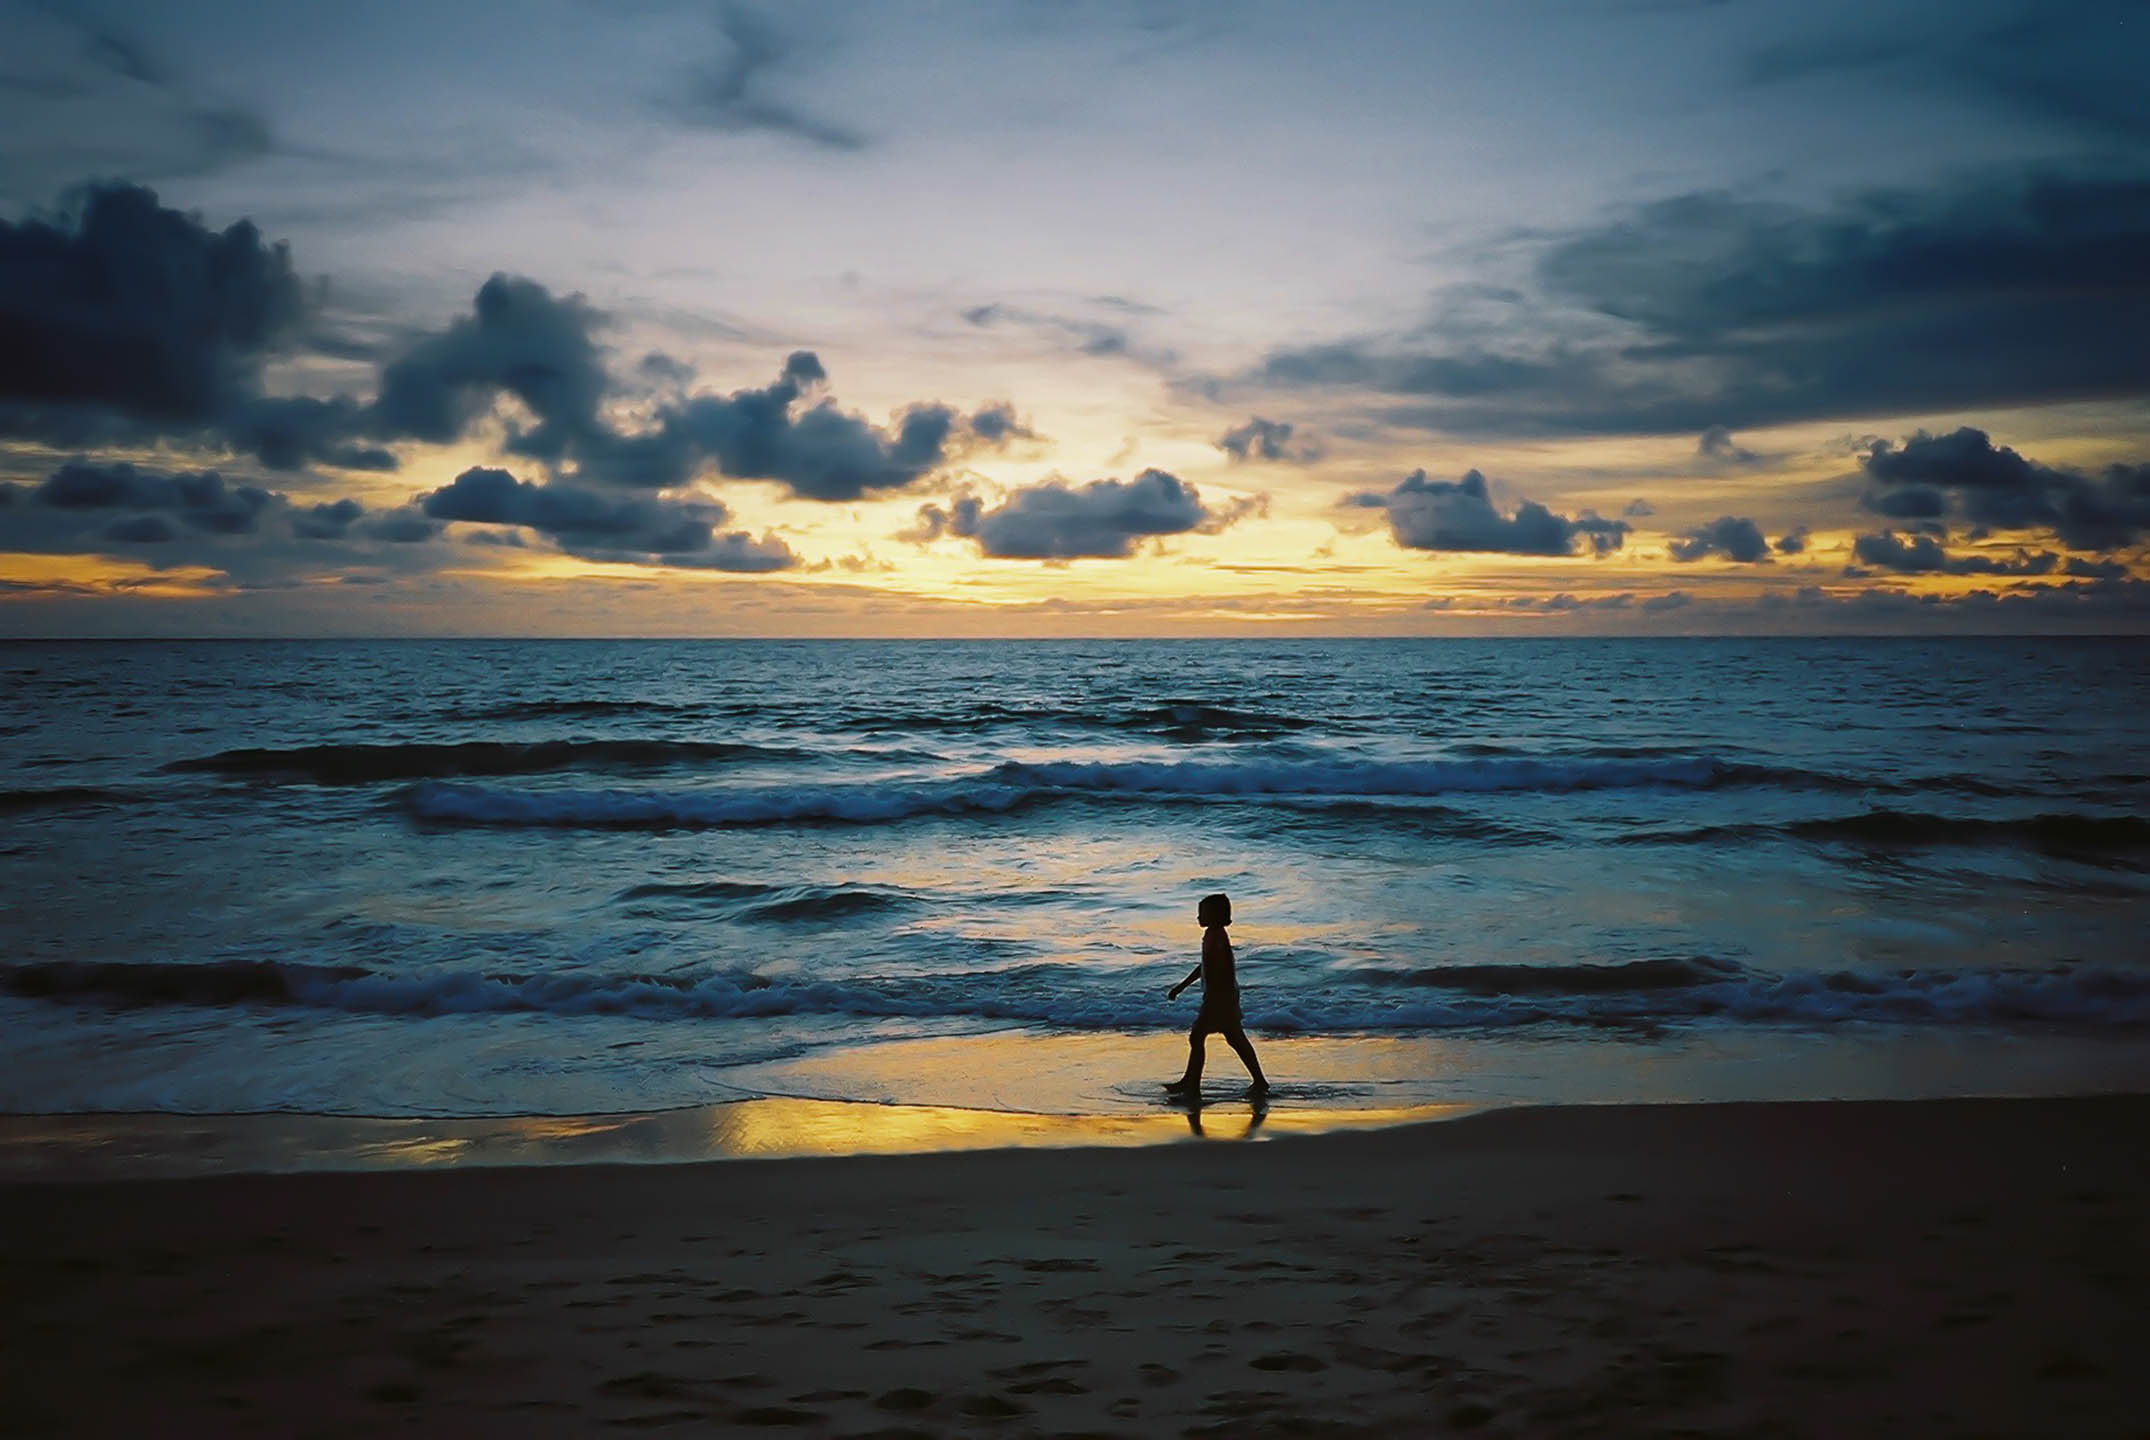 Young girl at sunset in Phuket, Thailand